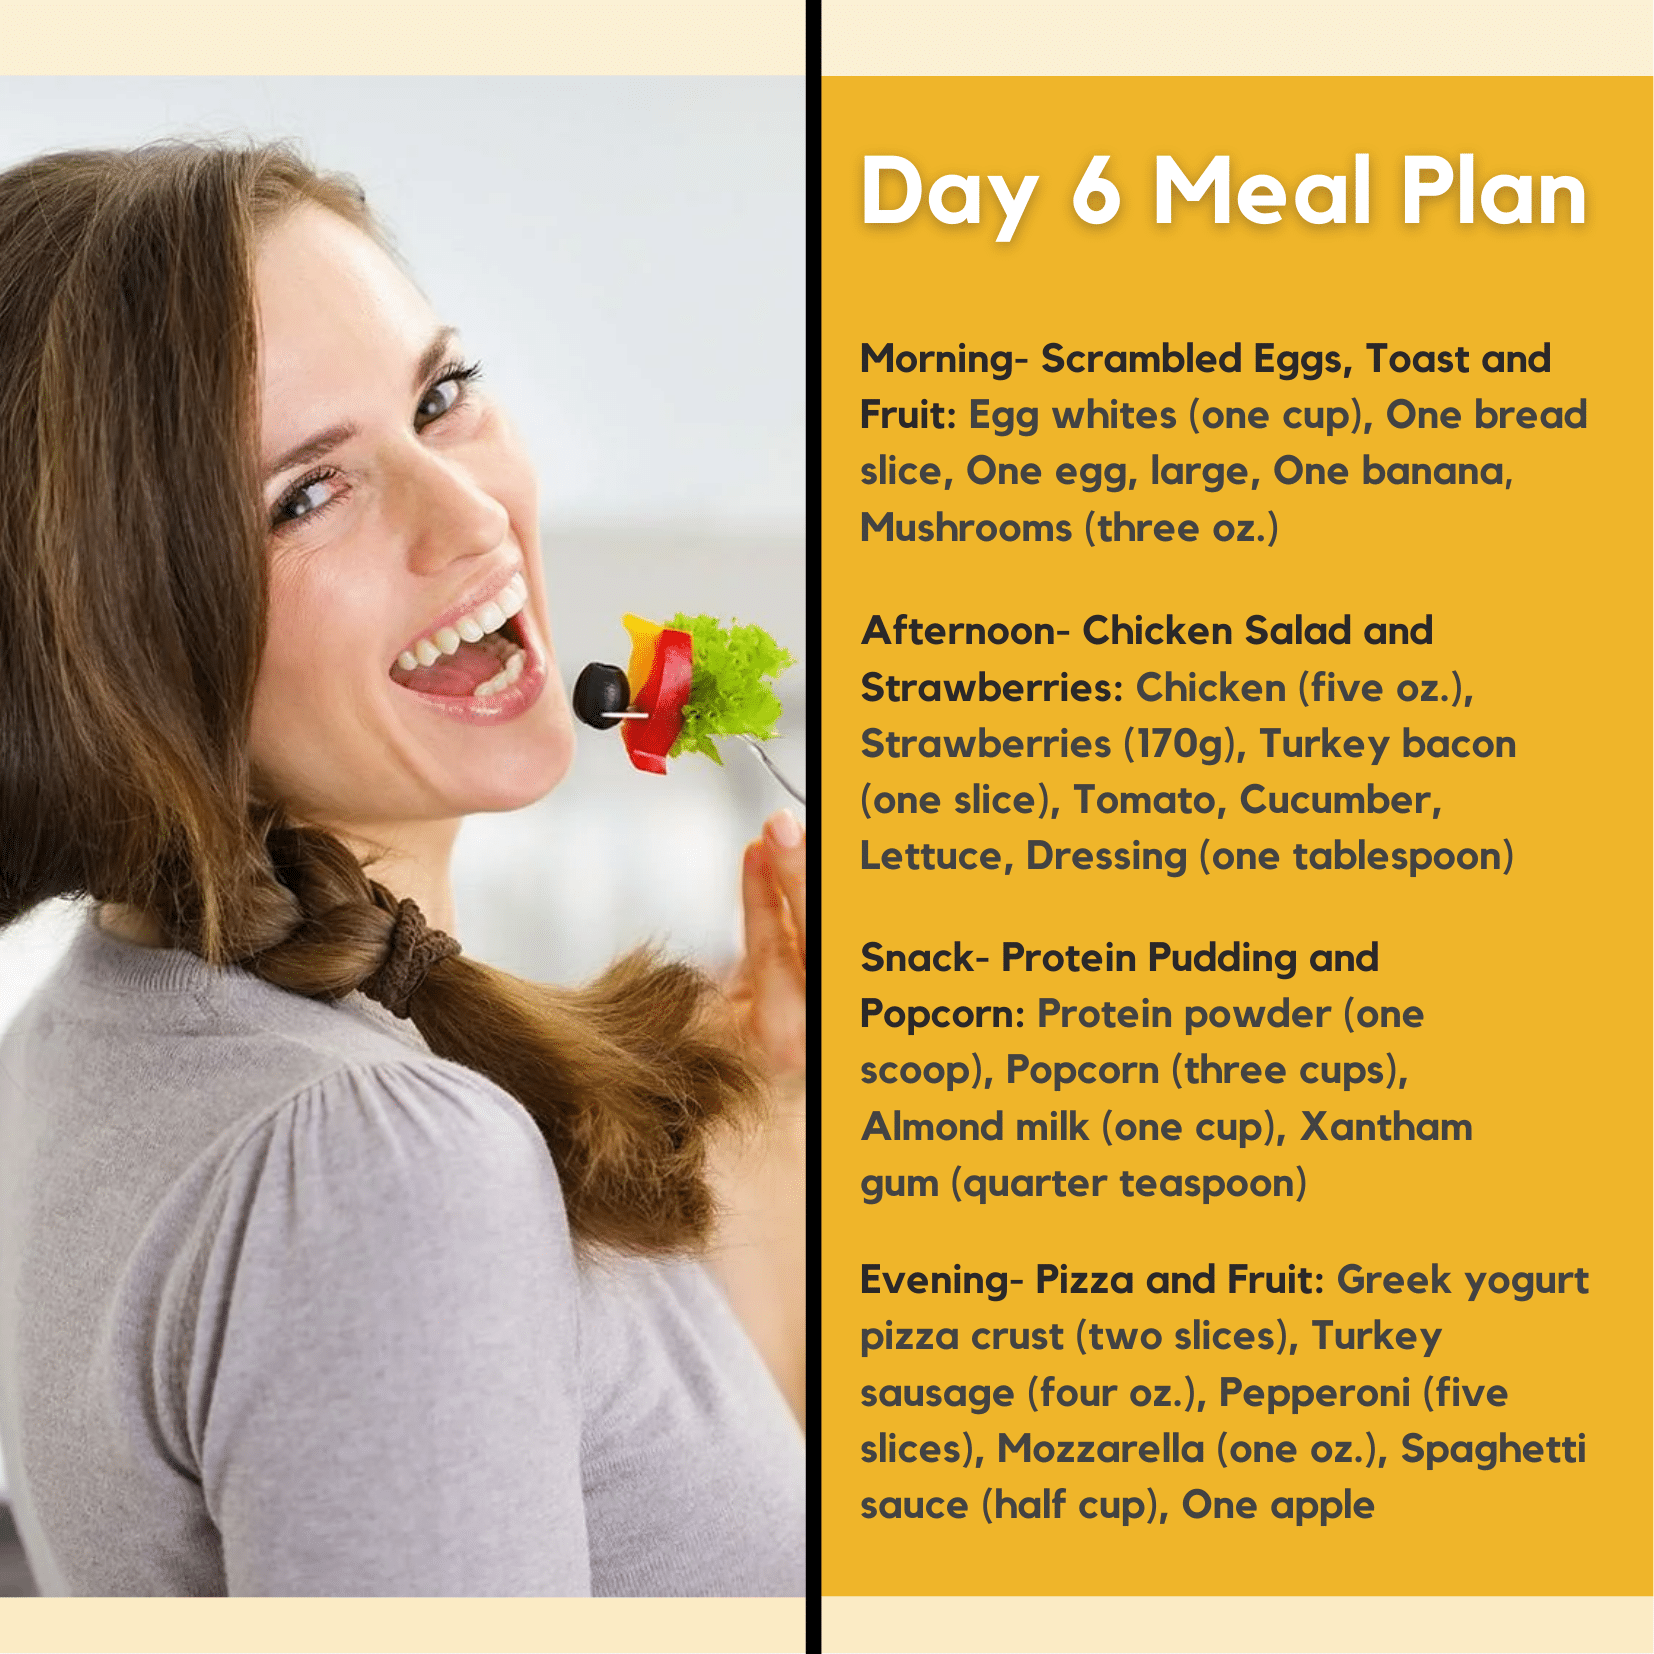 Day 6 Meal Plan